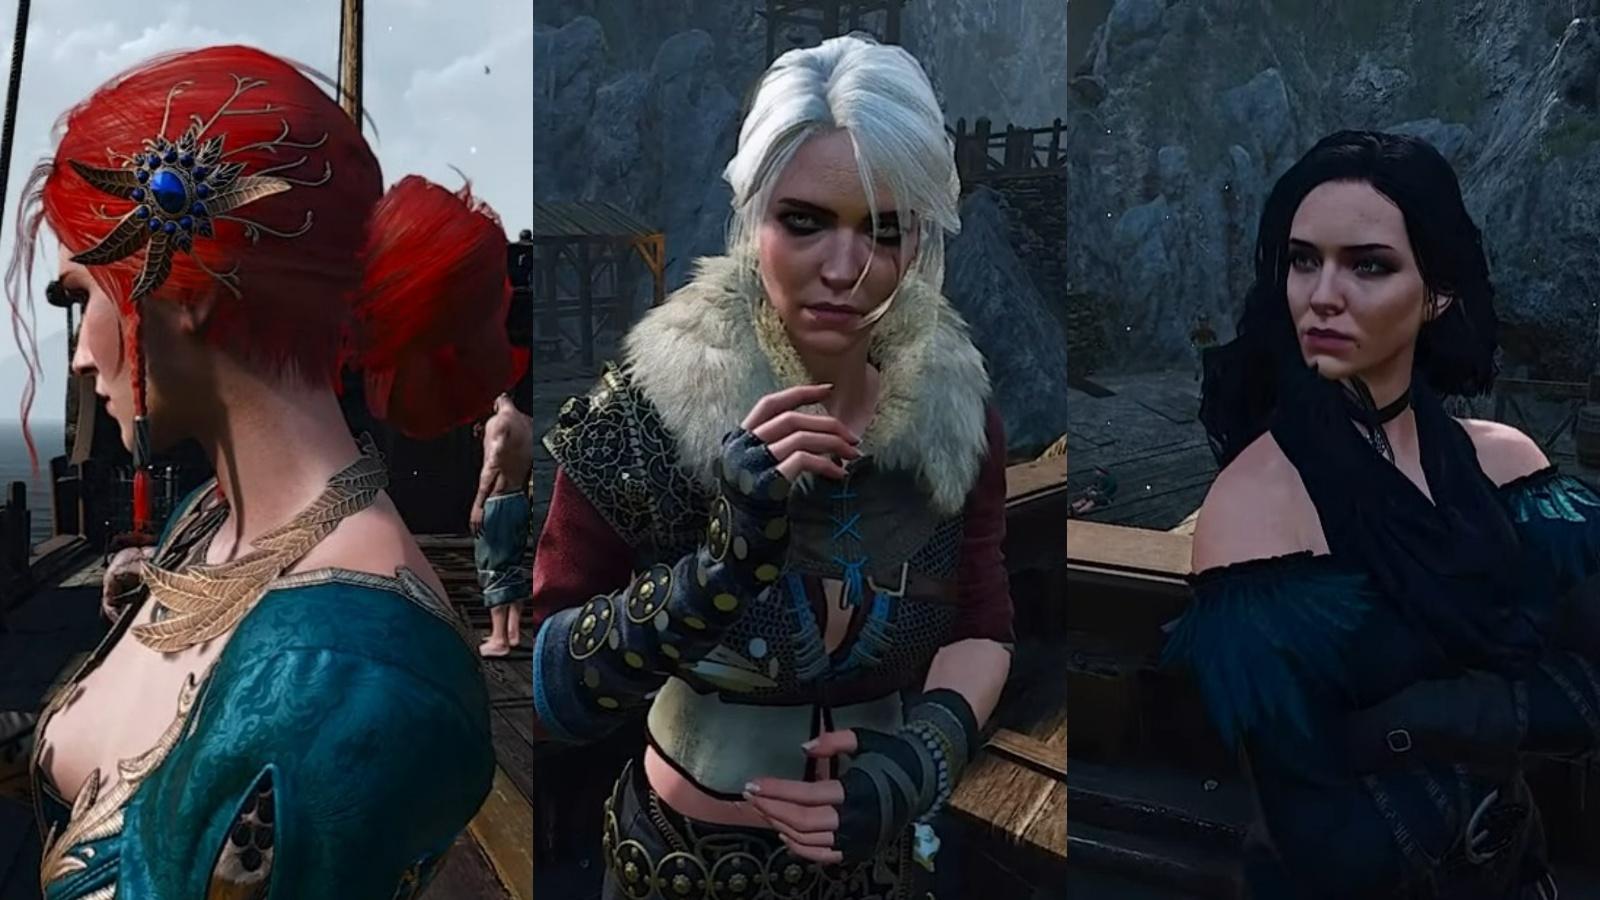 Alternative looks for characters in The Witcher 3